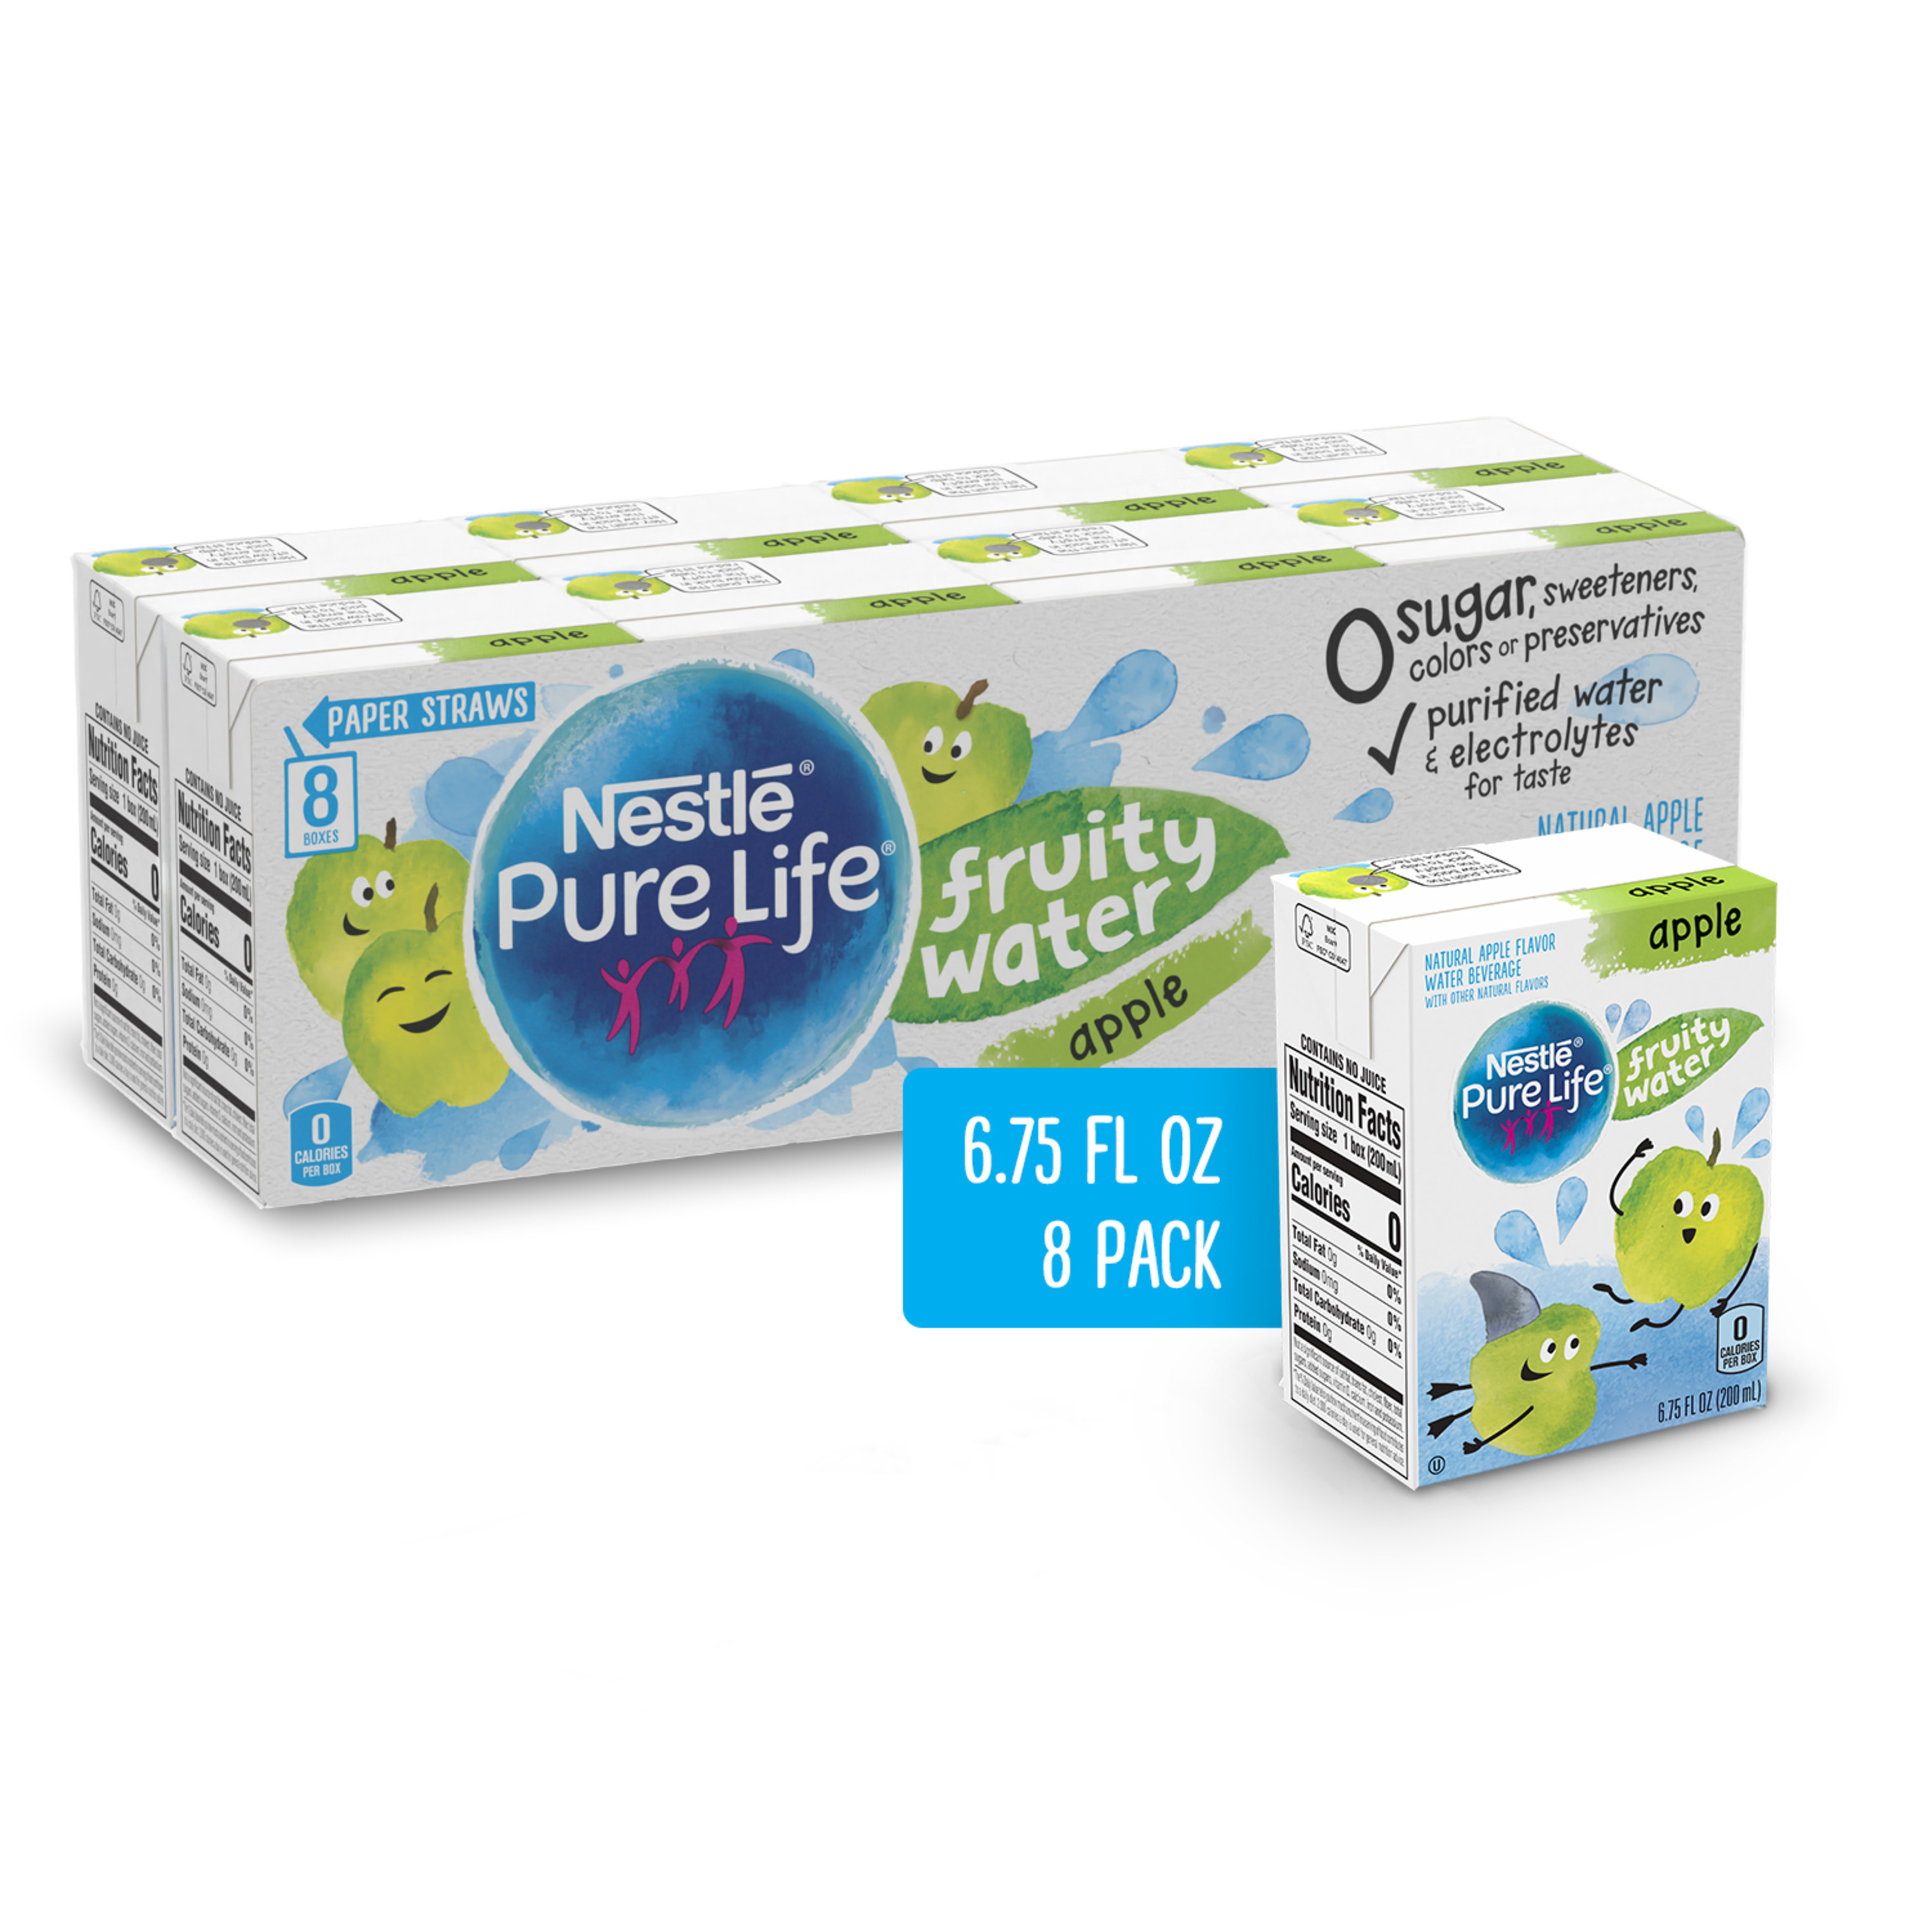 Pure Life Fruity Water Apple Flavor, 6.75 Fl. Oz (8-Pack) - image 1 of 3